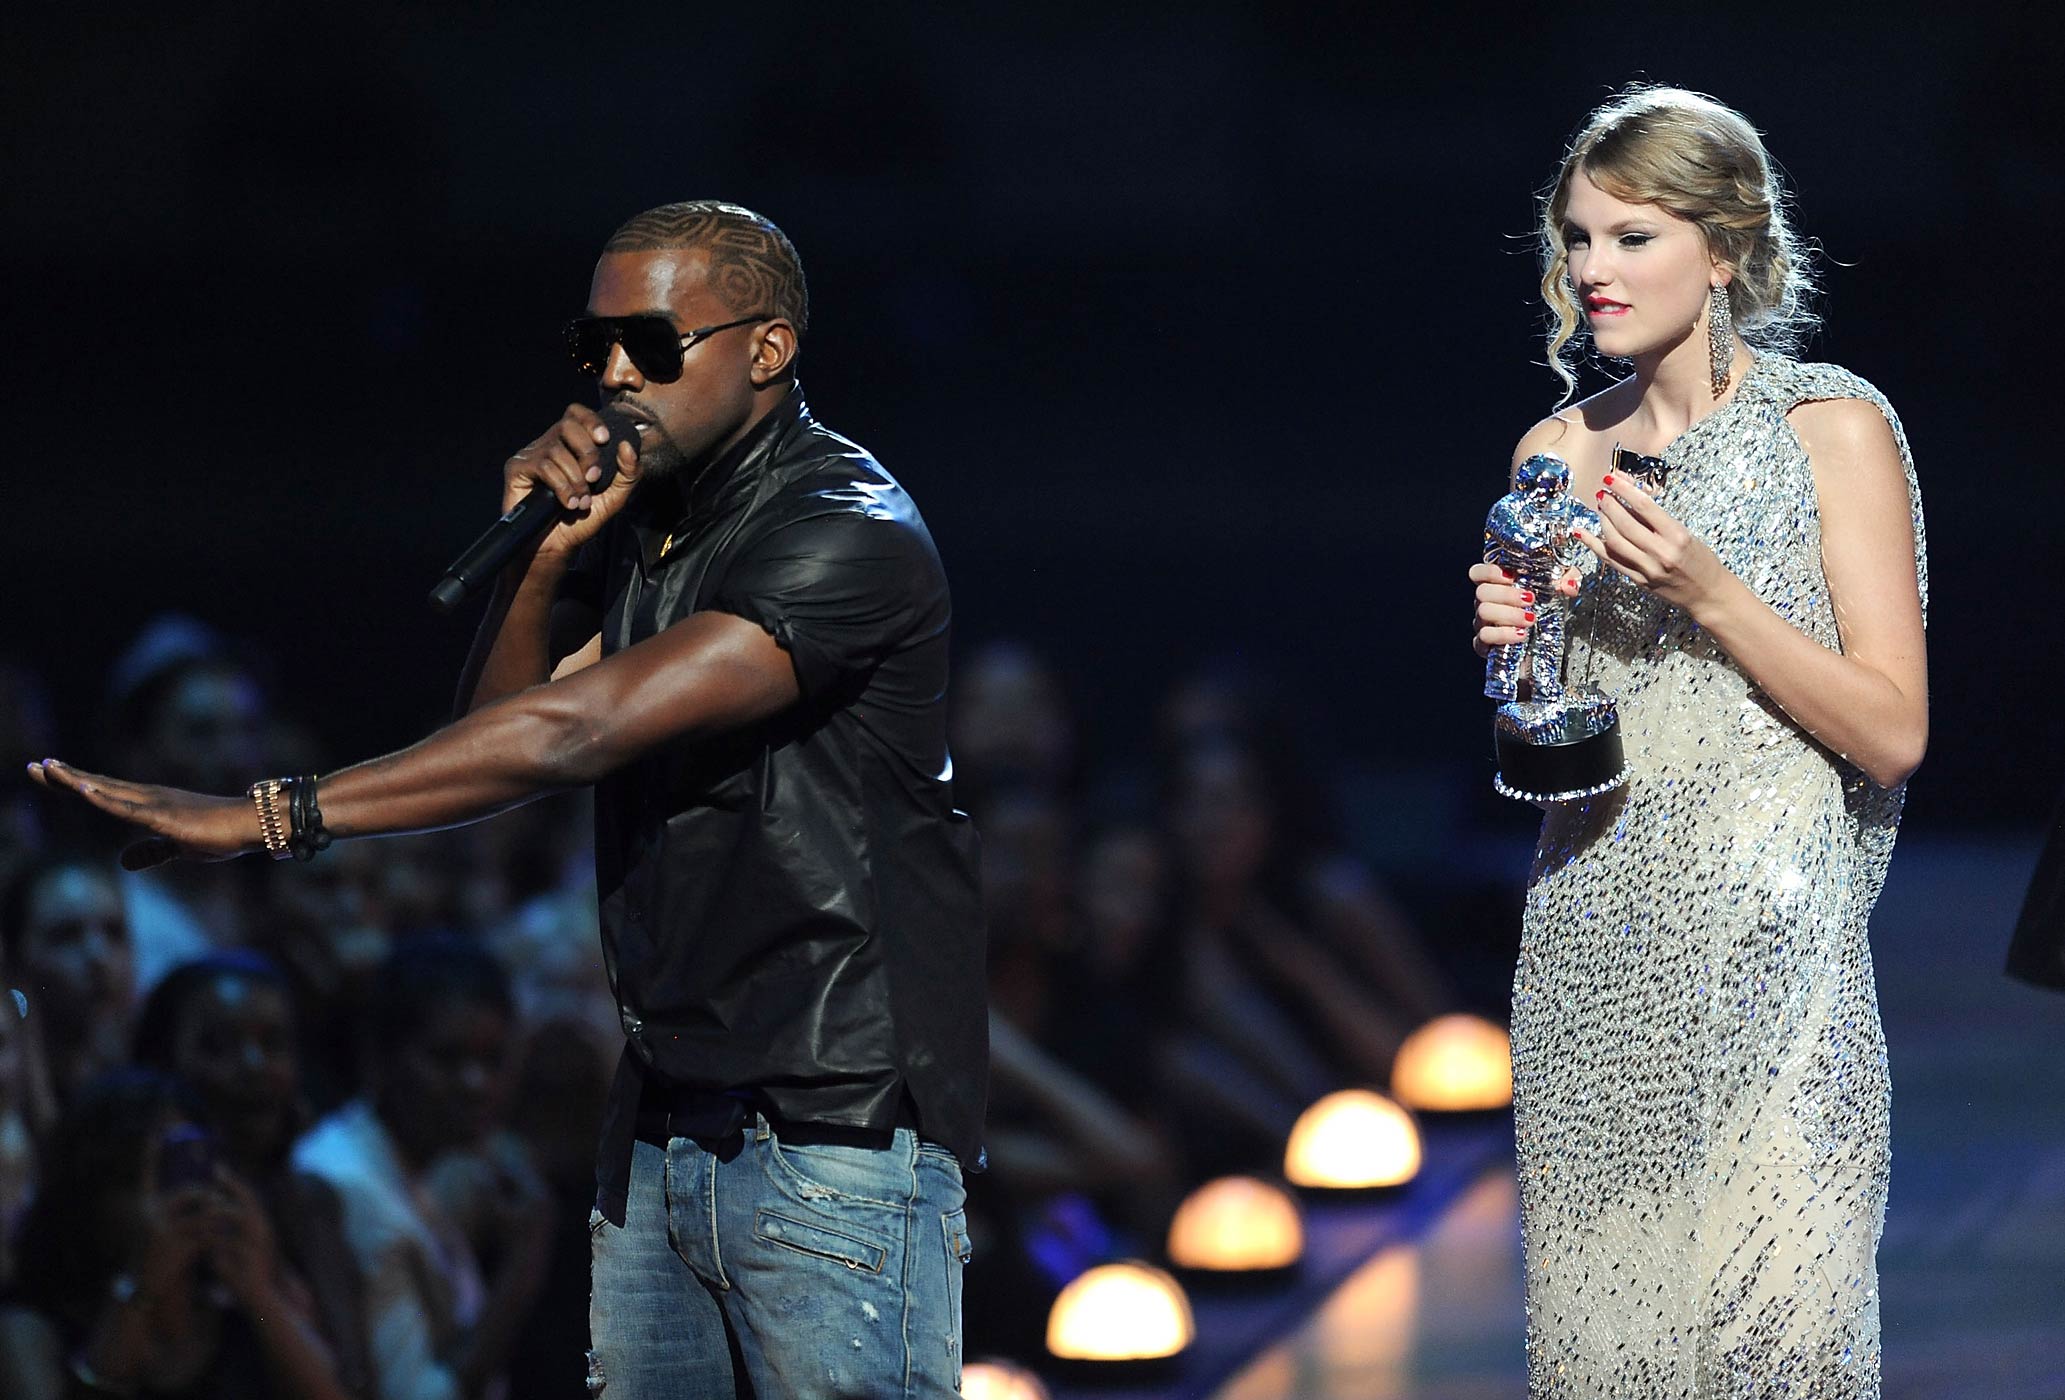 Kanye West takes the microphone from Taylor Swift and speaks onstage during the 2009 MTV Video Music Awards on Sept. 13, 2009 (Kevin Mazur—WireImage/Getty Images)